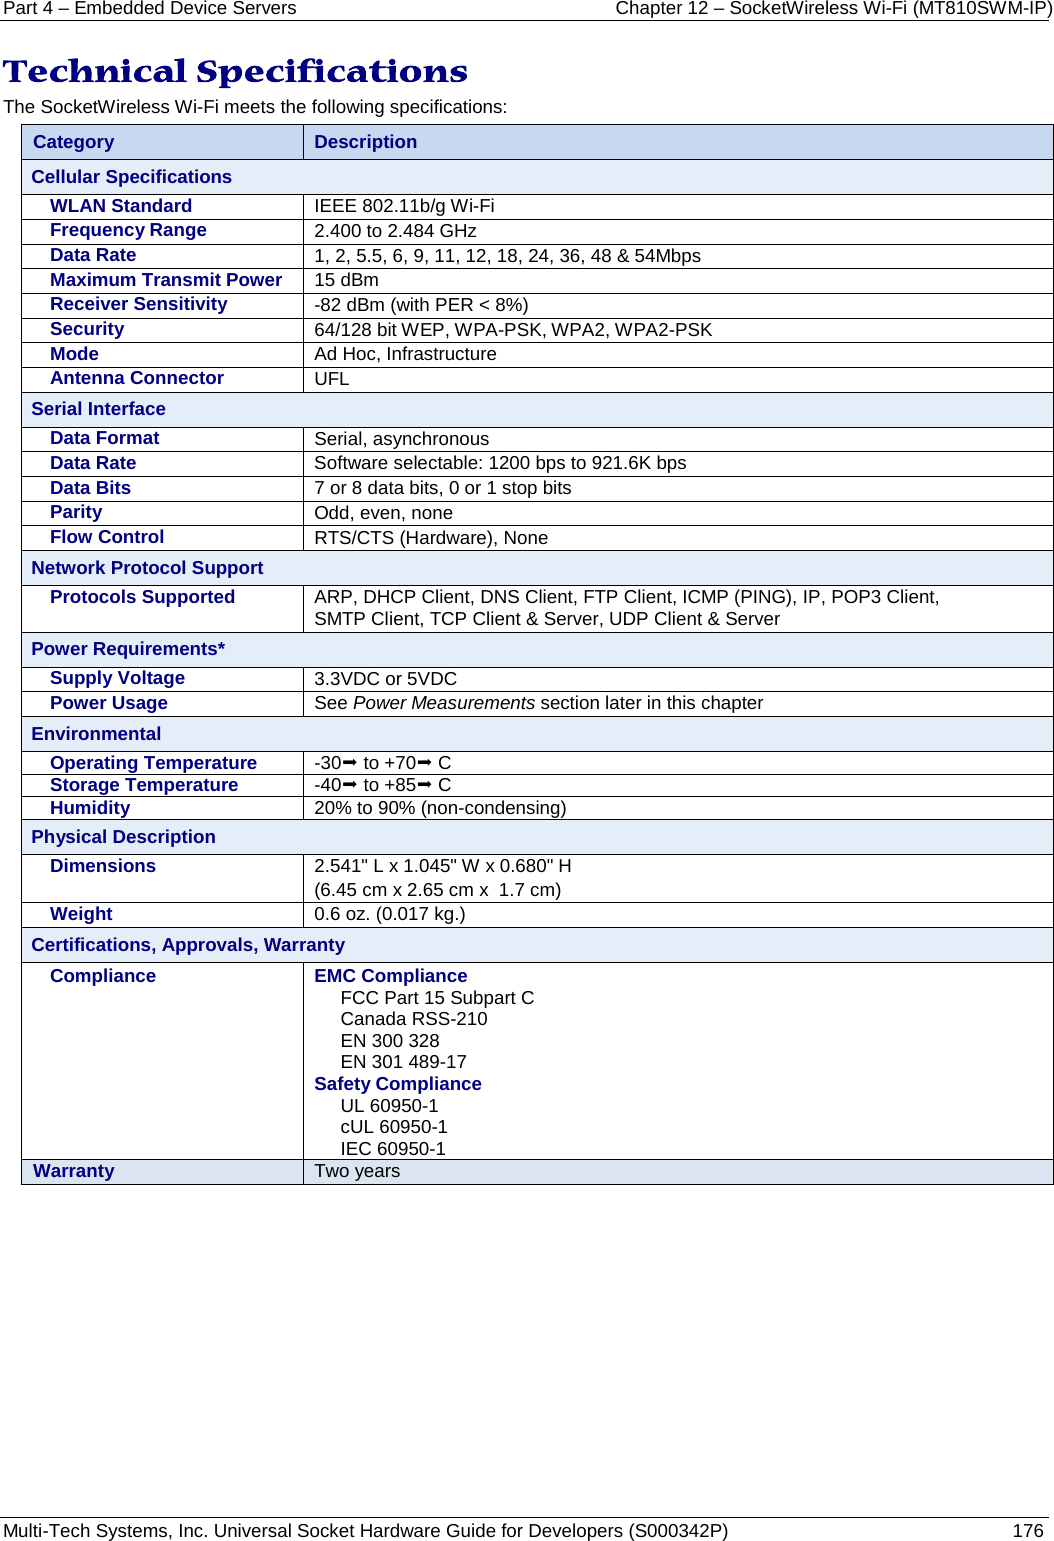 Part 4 – Embedded Device Servers Chapter 12 – SocketWireless Wi-Fi (MT810SWM-IP) Multi-Tech Systems, Inc. Universal Socket Hardware Guide for Developers (S000342P)  176  Technical Specifications The SocketWireless Wi-Fi meets the following specifications:  Category Description Cellular Specifications WLAN Standard IEEE 802.11b/g Wi-Fi  Frequency Range 2.400 to 2.484 GHz Data Rate 1, 2, 5.5, 6, 9, 11, 12, 18, 24, 36, 48 &amp; 54Mbps Maximum Transmit Power 15 dBm Receiver Sensitivity -82 dBm (with PER &lt; 8%) Security 64/128 bit WEP, WPA-PSK, WPA2, WPA2-PSK  Mode Ad Hoc, Infrastructure Antenna Connector UFL Serial Interface Data Format Serial, asynchronous Data Rate Software selectable: 1200 bps to 921.6K bps Data Bits 7 or 8 data bits, 0 or 1 stop bits Parity Odd, even, none Flow Control RTS/CTS (Hardware), None Network Protocol Support Protocols Supported ARP, DHCP Client, DNS Client, FTP Client, ICMP (PING), IP, POP3 Client,  SMTP Client, TCP Client &amp; Server, UDP Client &amp; Server  Power Requirements* Supply Voltage 3.3VDC or 5VDC Power Usage See Power Measurements section later in this chapter   Environmental Operating Temperature -30 to +70 C  Storage Temperature -40 to +85 C Humidity 20% to 90% (non-condensing)    Physical Description Dimensions 2.541&quot; L x 1.045&quot; W x 0.680&quot; H (6.45 cm x 2.65 cm x  1.7 cm) Weight 0.6 oz. (0.017 kg.) Certifications, Approvals, Warranty Compliance EMC Compliance FCC Part 15 Subpart C Canada RSS-210 EN 300 328 EN 301 489-17 Safety Compliance UL 60950-1 cUL 60950-1 IEC 60950-1 Warranty Two years     